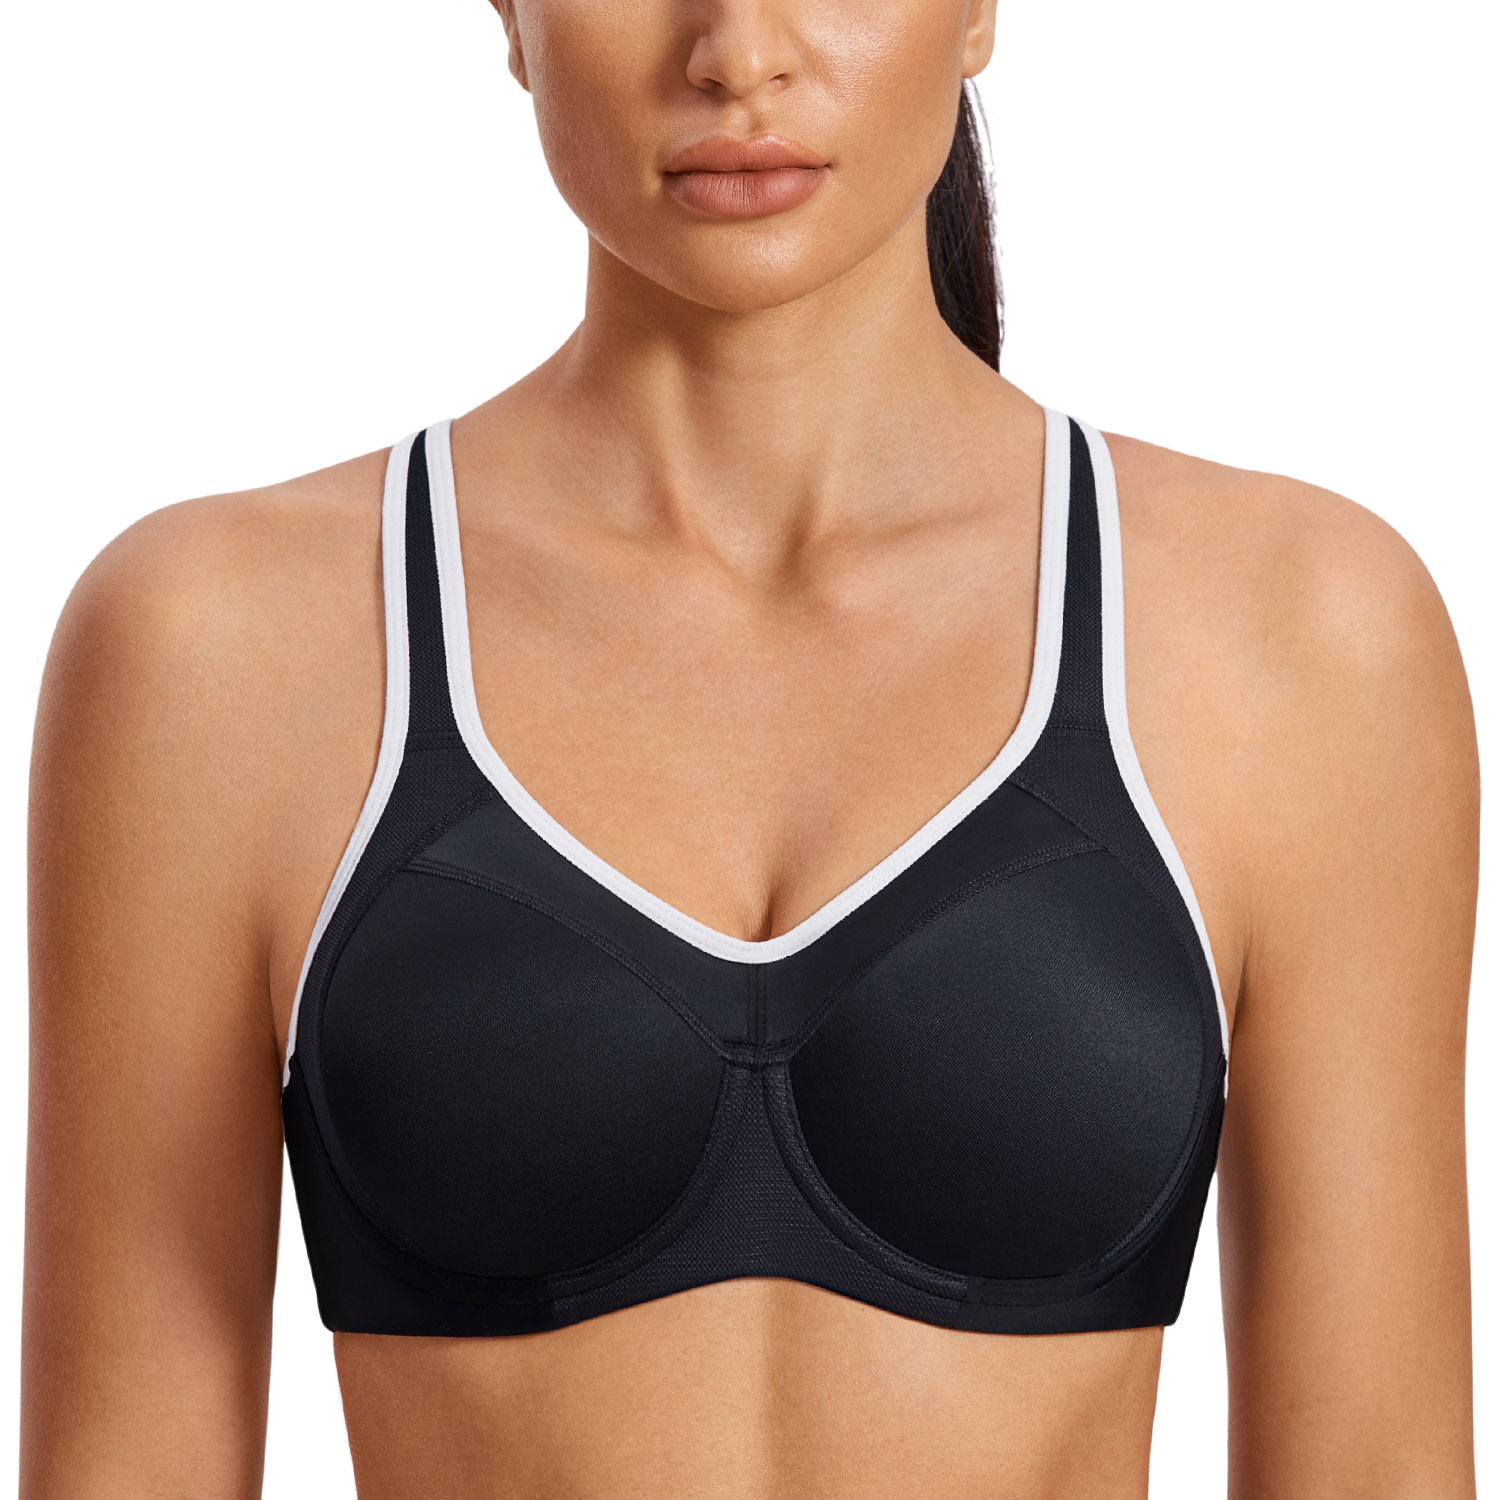 SYROKAN Women's Full Support Sports Bra High Impact Lightly Lined Underwire